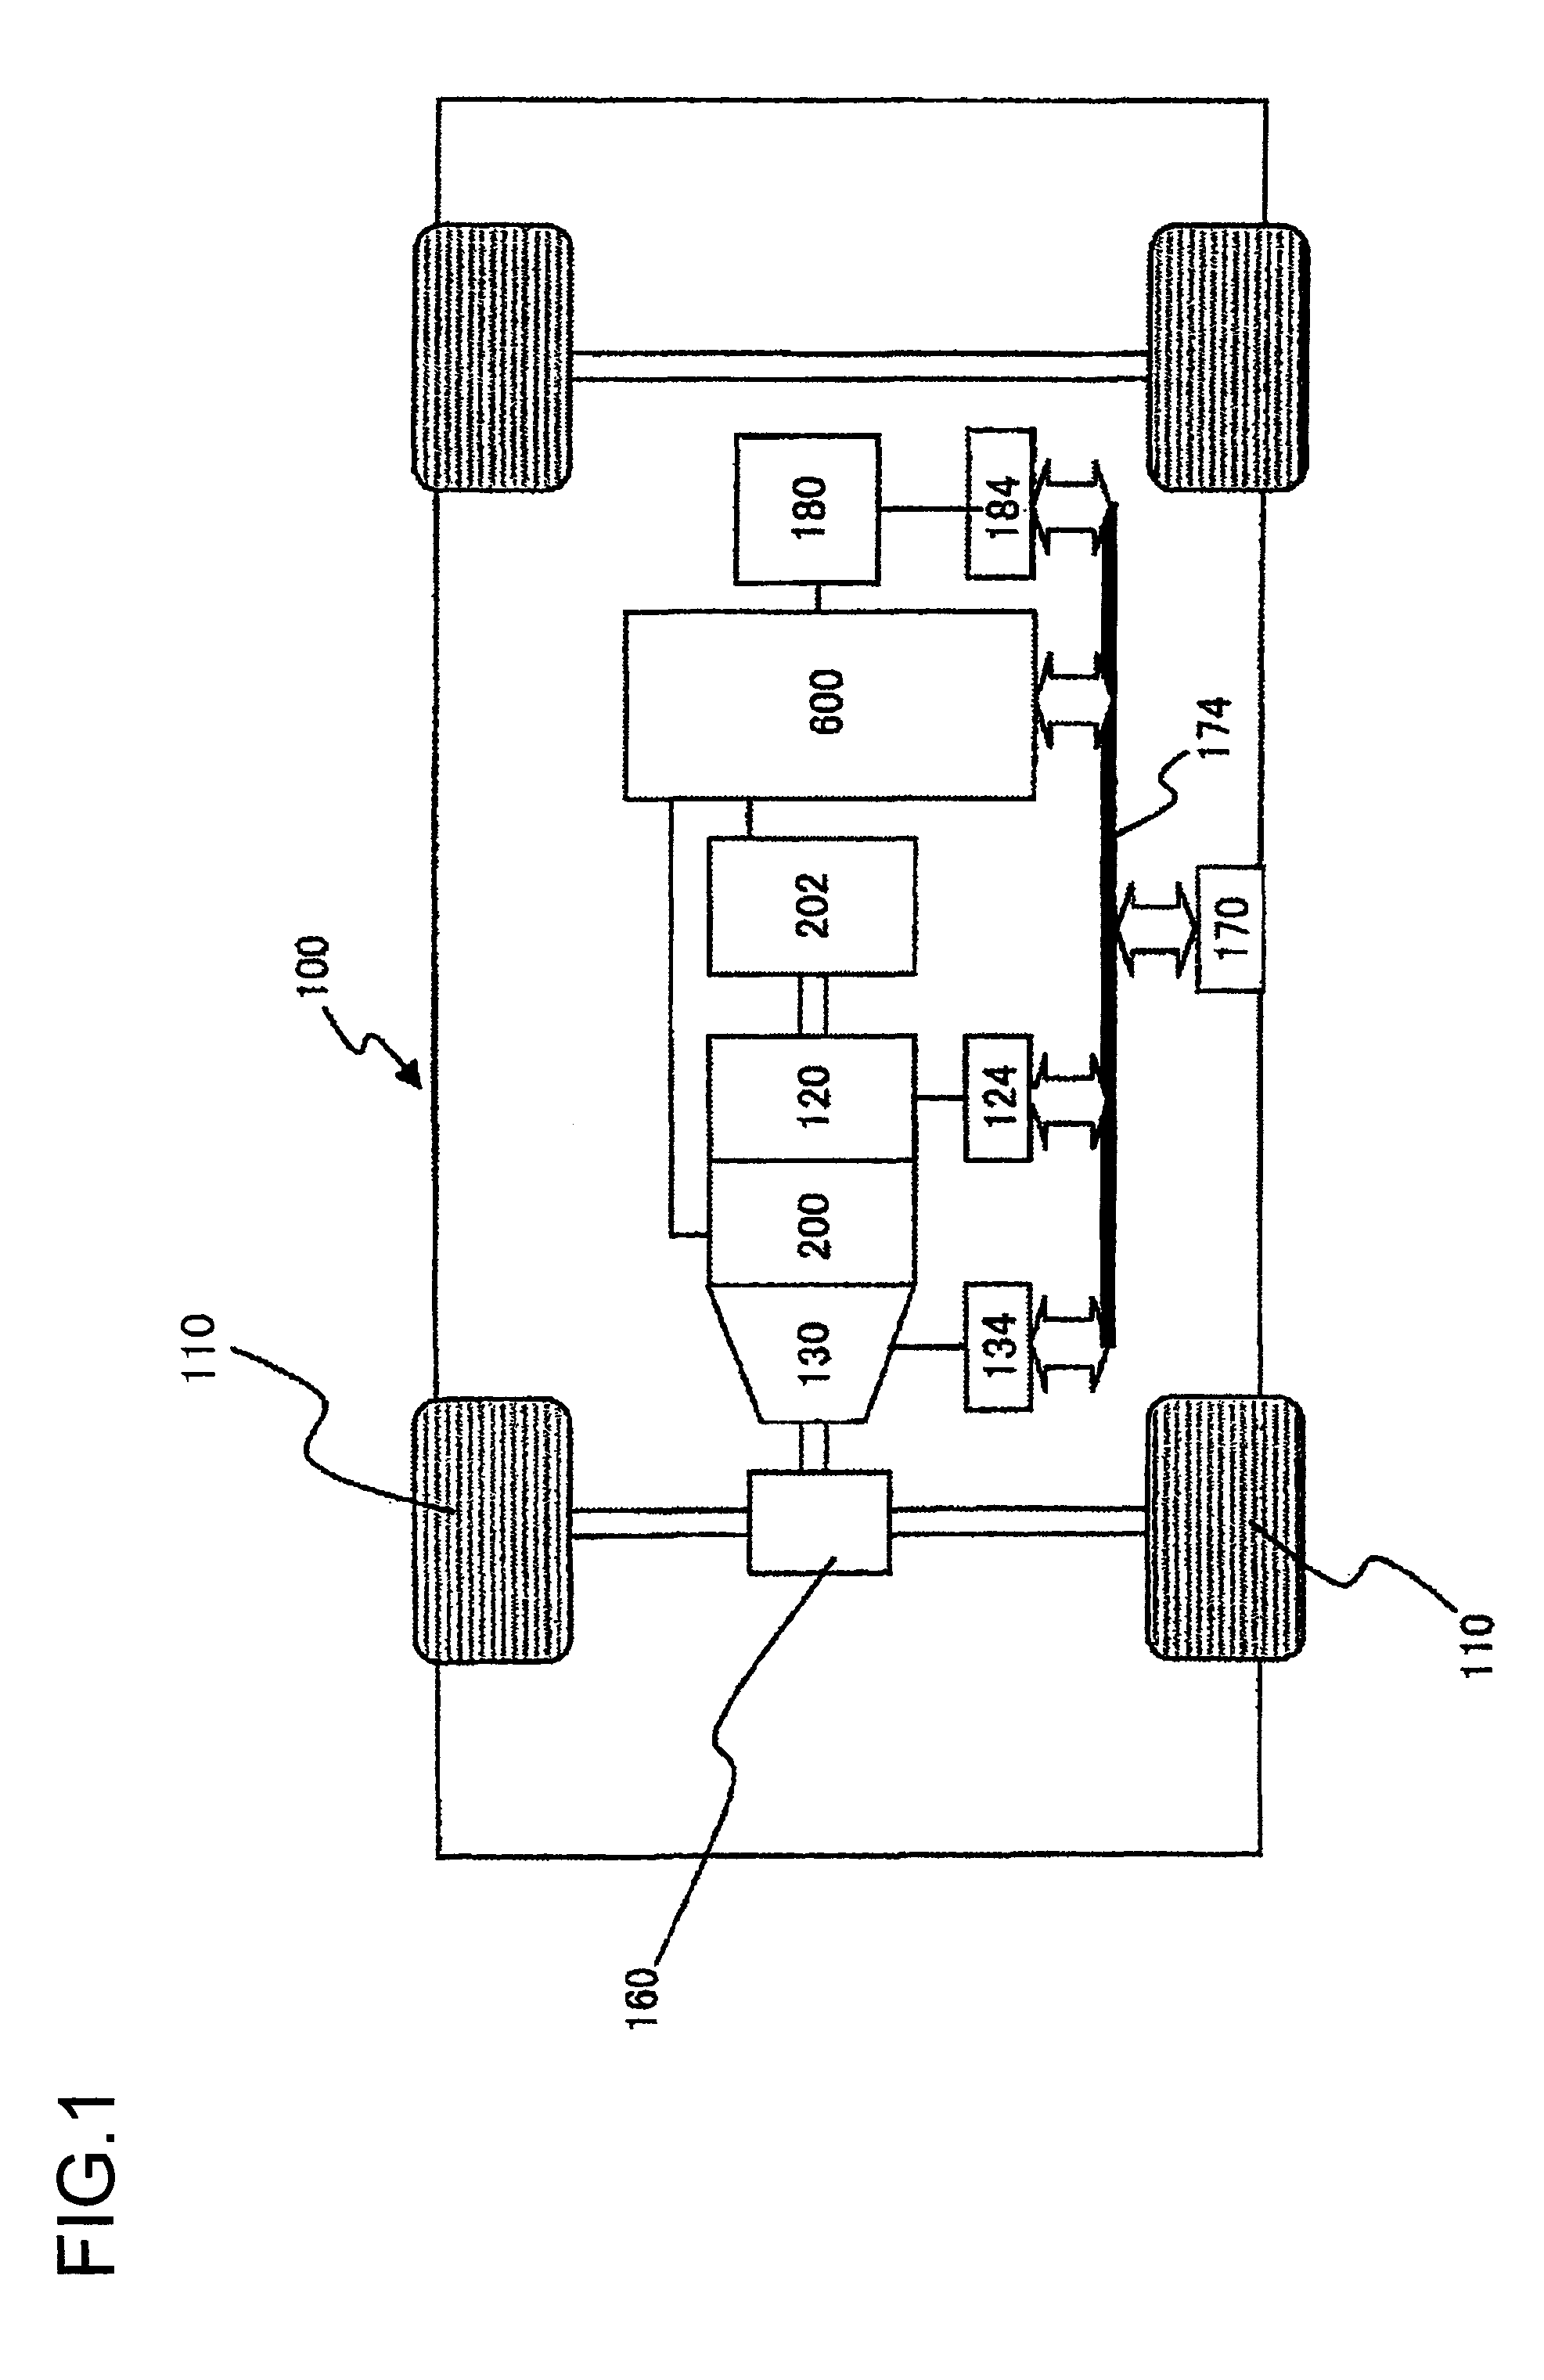 Electric machine with Q-offset grooved interior-magnet rotor and vehicle